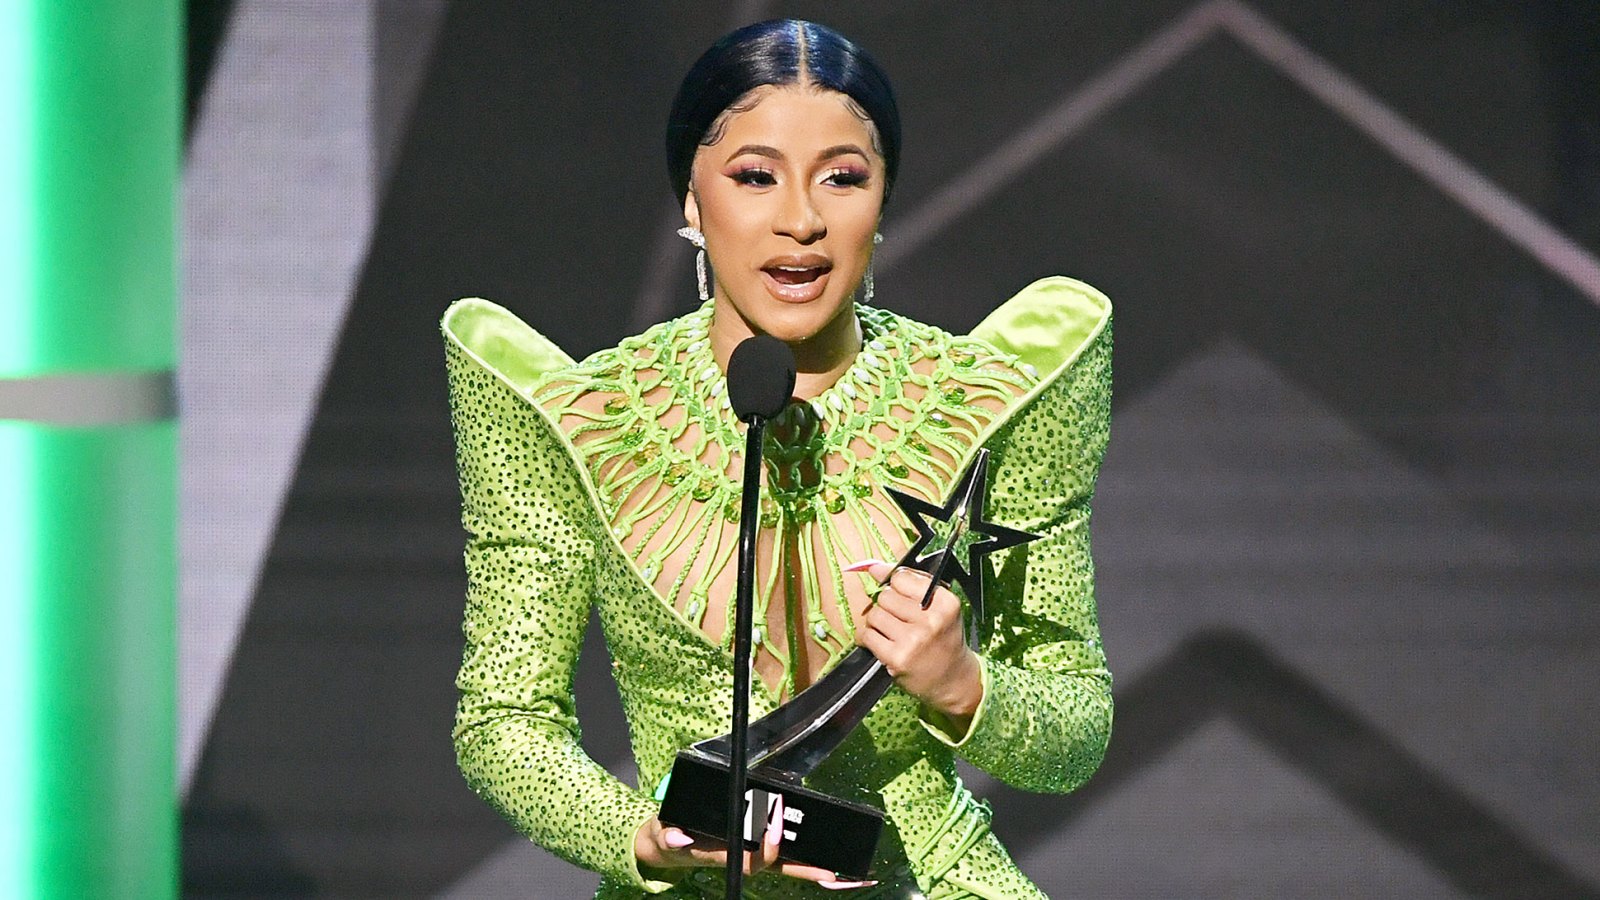 Cardi B Accepts Album of the Year Onstage at the 2019 BET Awards